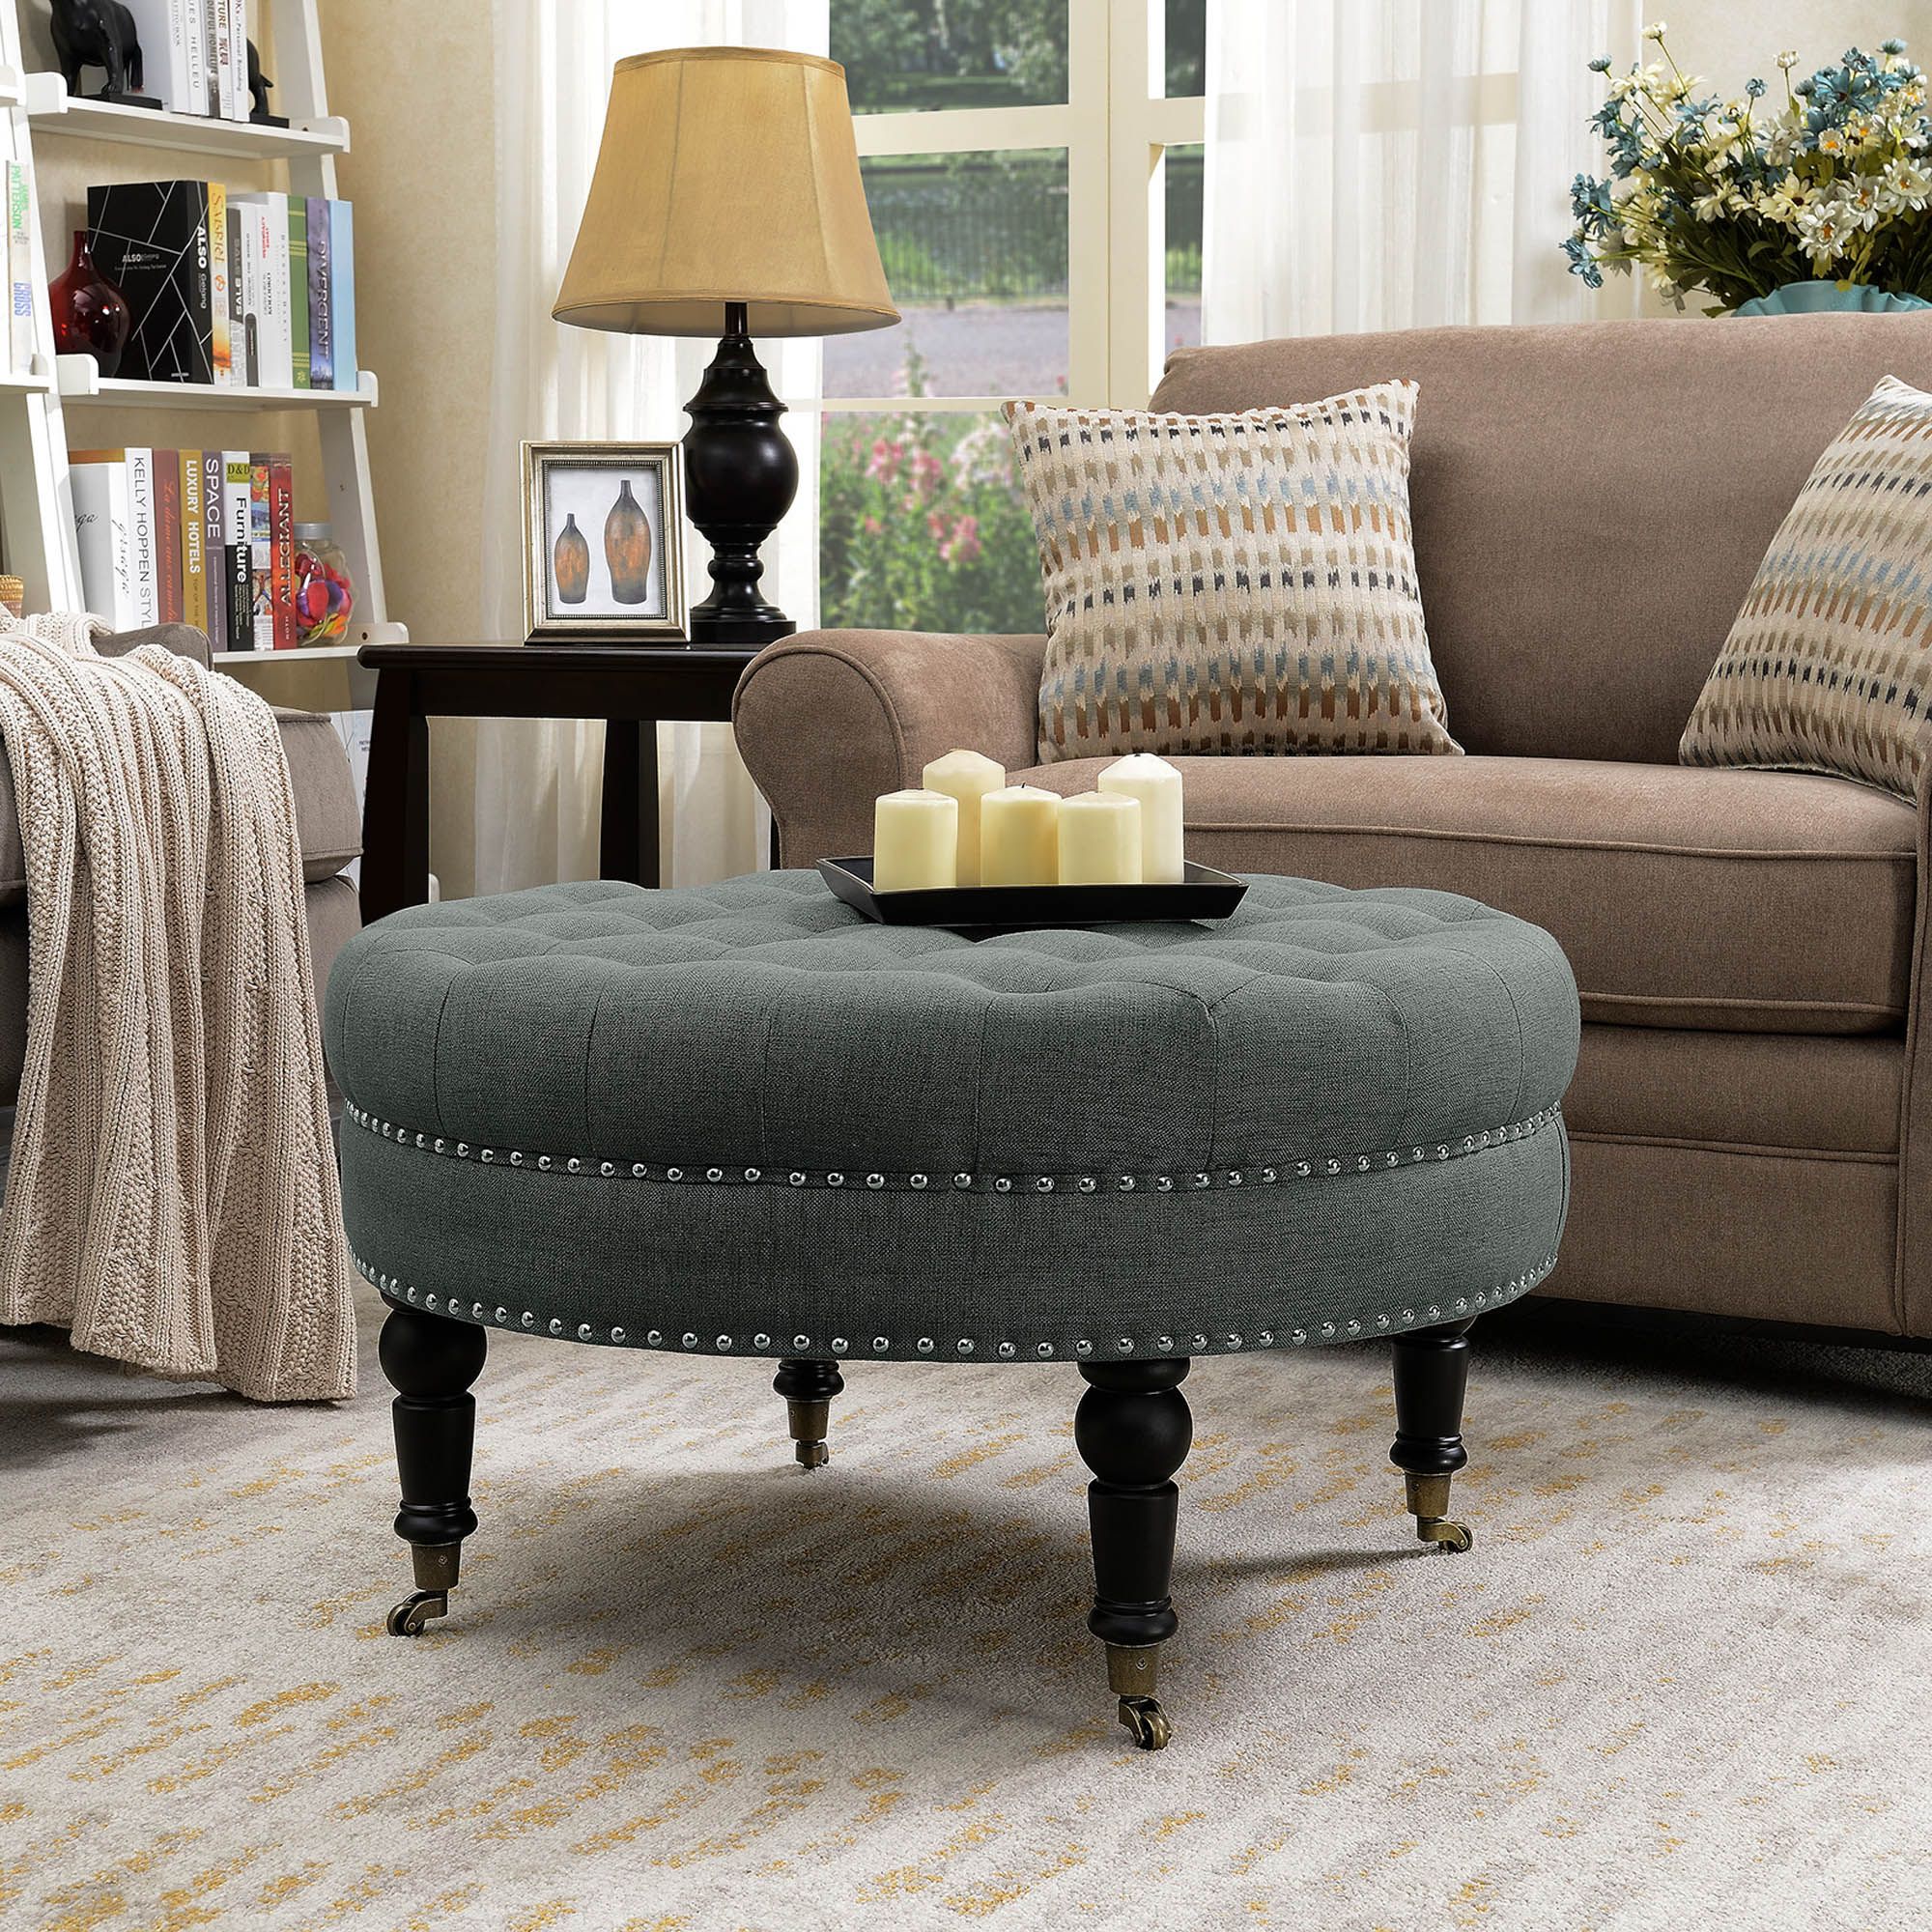 Round Ottoman Large Tufted Upholstery Bedroom With Caster Wheel, Gray Regarding Light Gray Fabric Tufted Round Storage Ottomans (View 18 of 20)